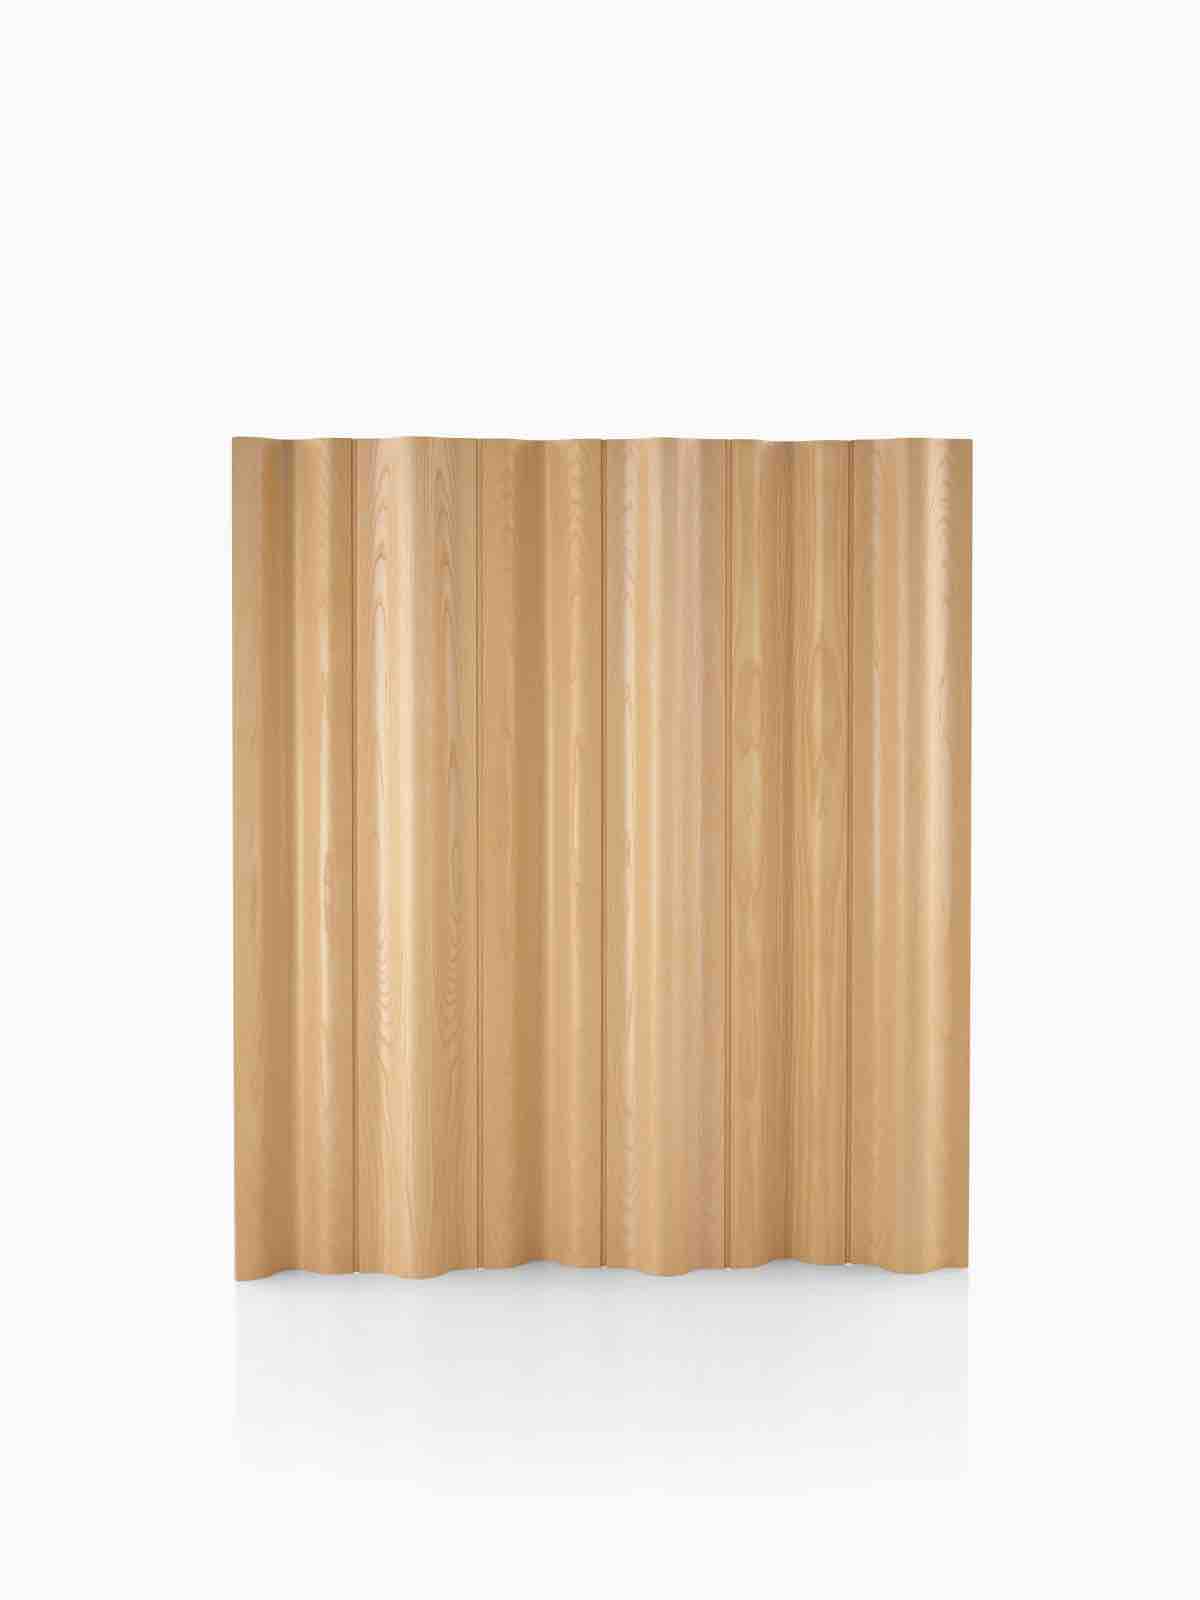 Eames Moulded Plywood Folding Screen